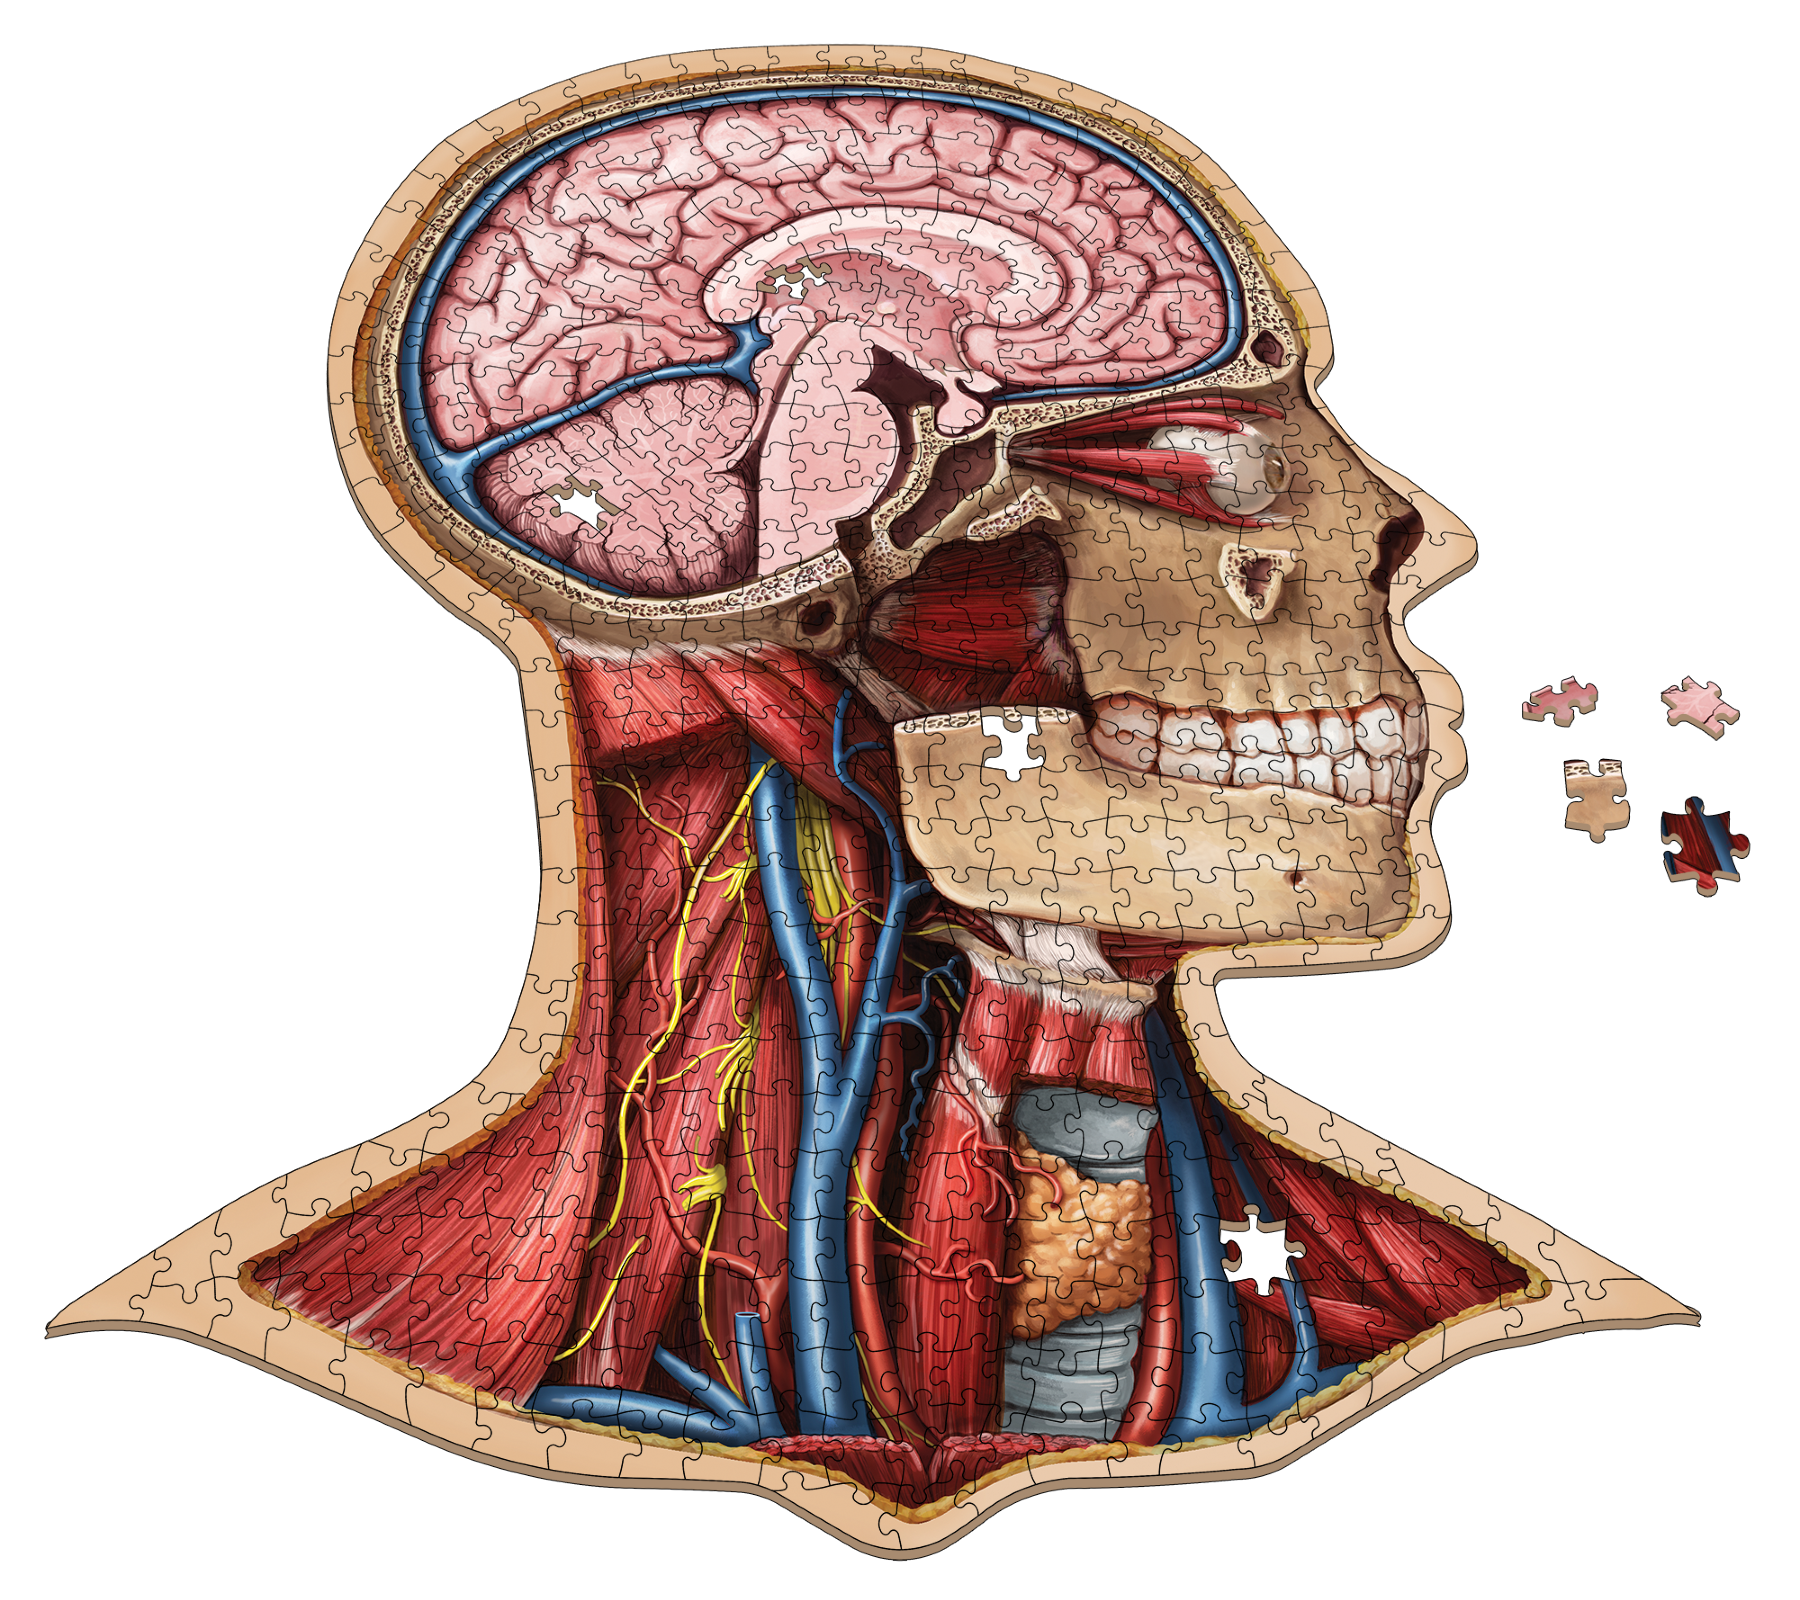 Human Head Anatomy Jigsaw Puzzle | Unique Shaped Science Puzzles with Accurate Medical Illustrations